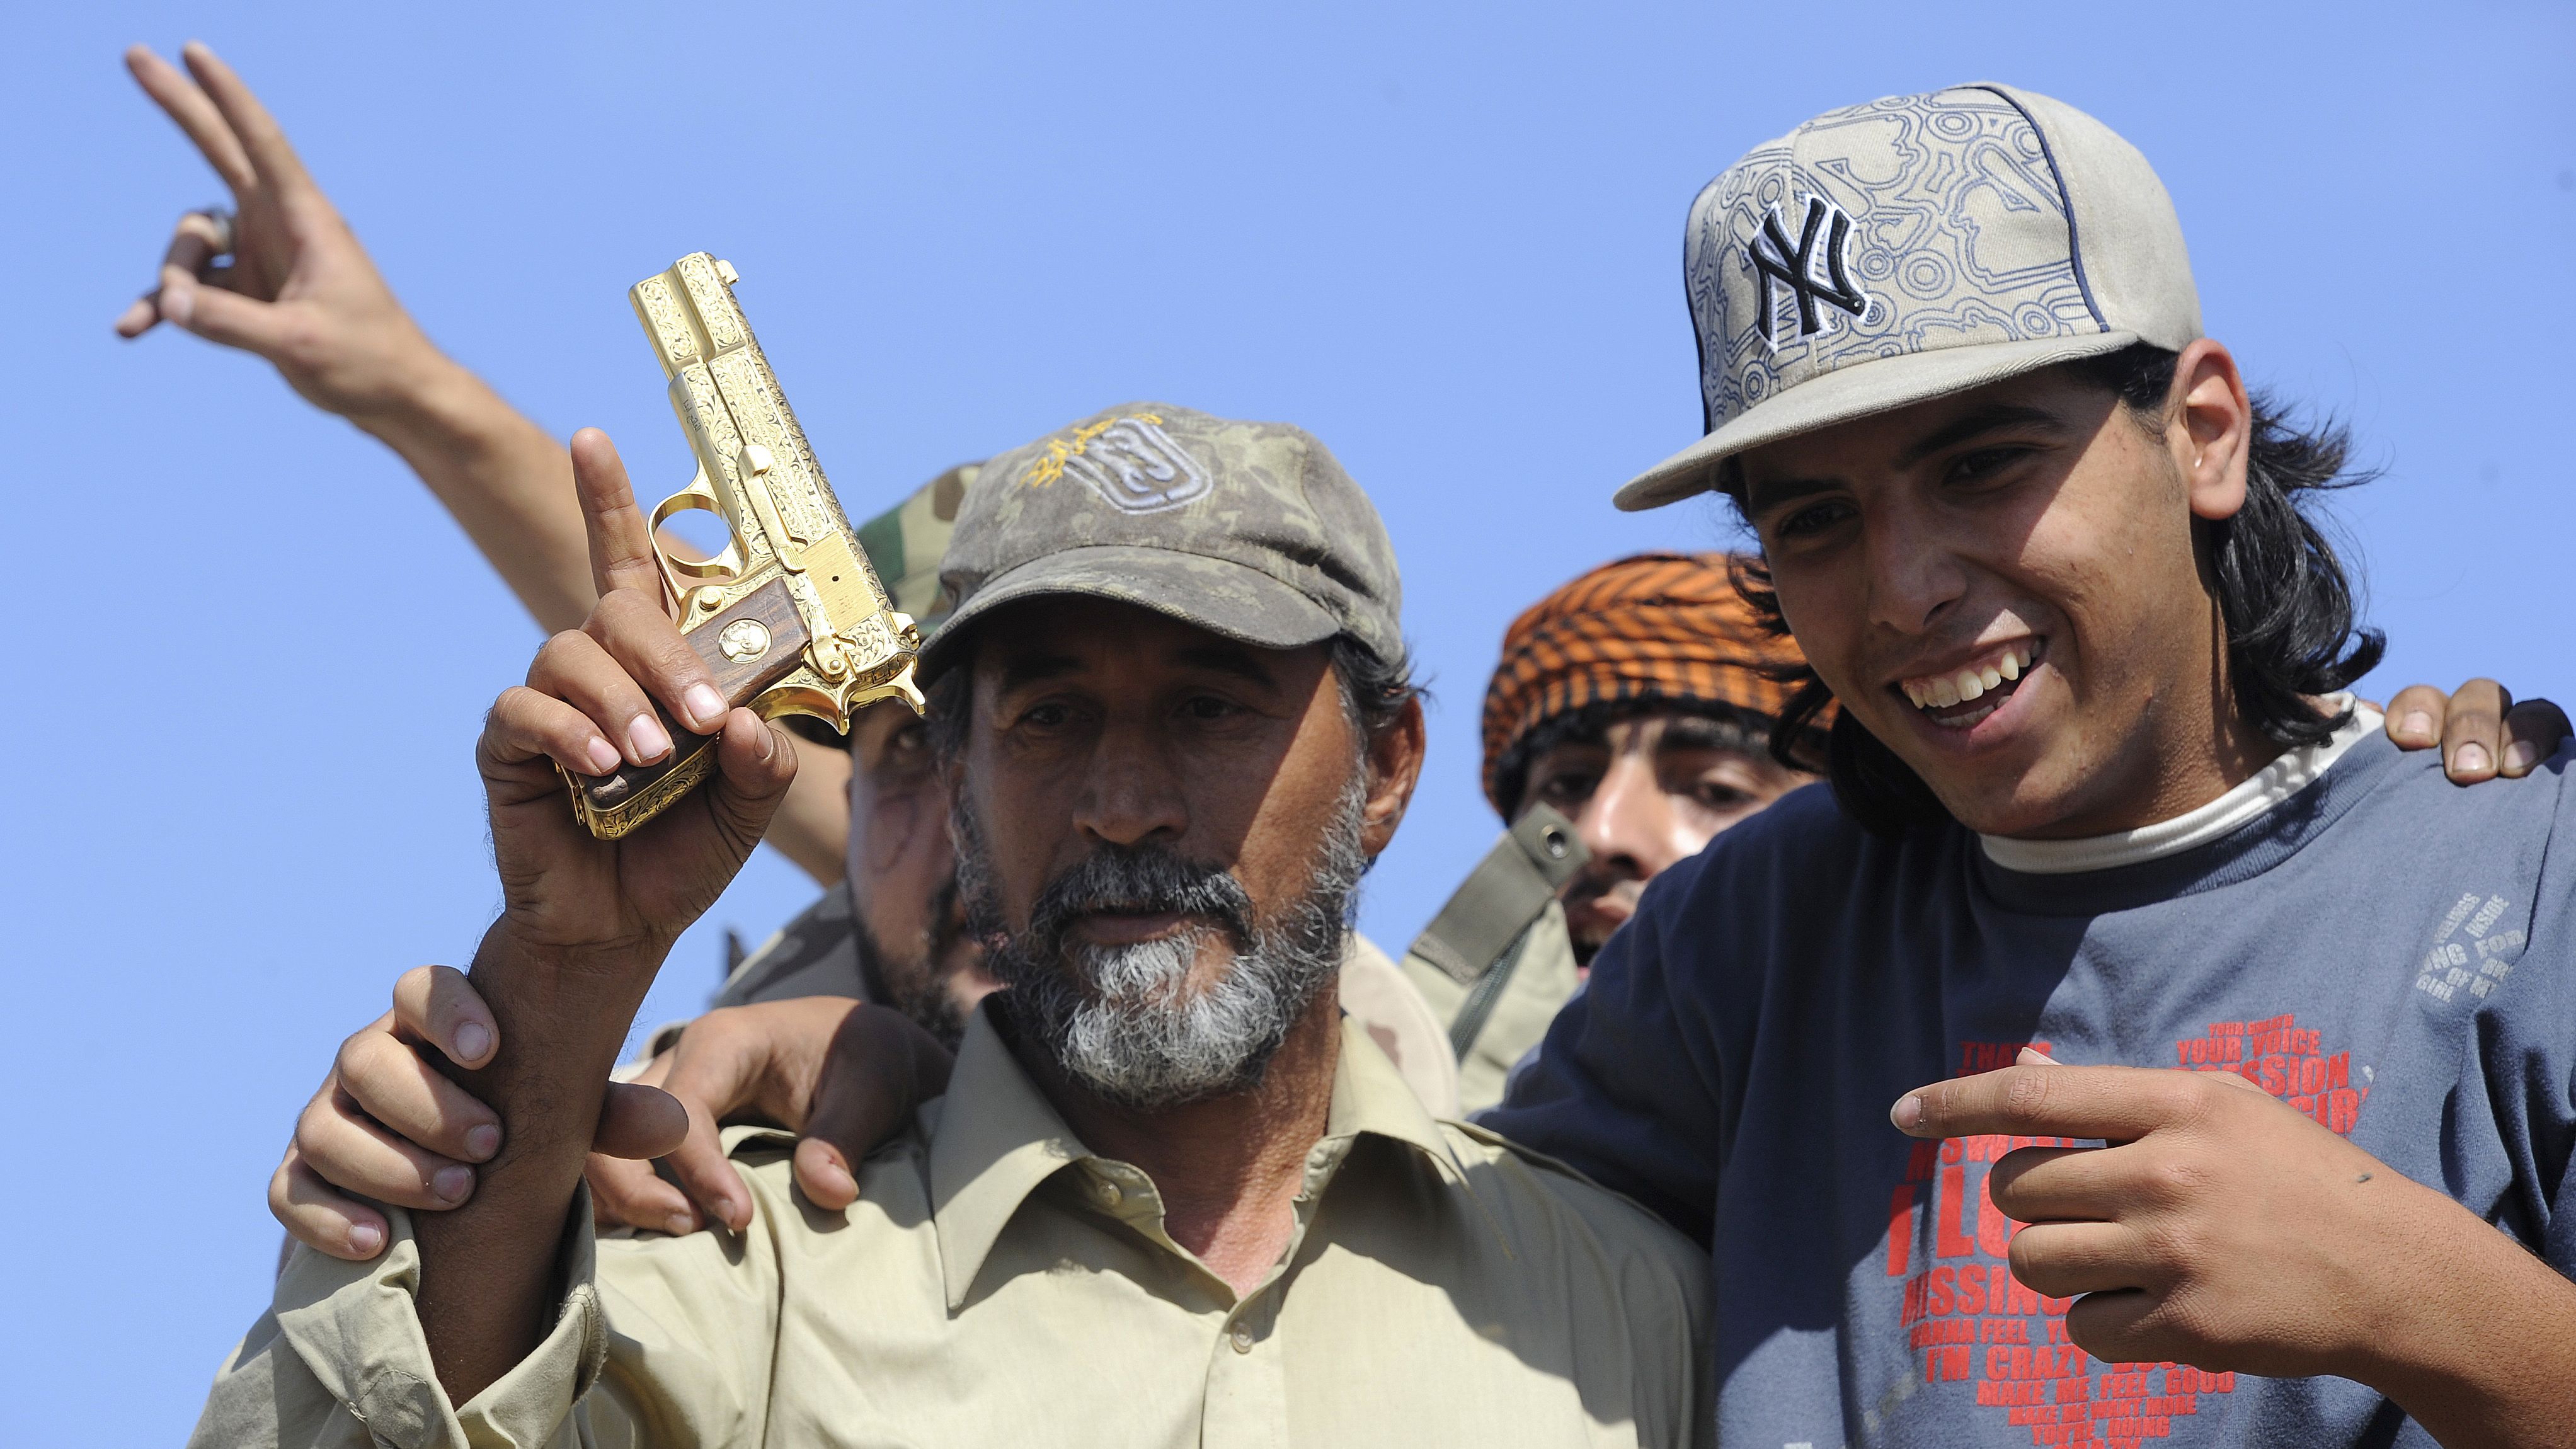 Anti-Gadhafi fighters hold what they say is the gold-plated gun of the ousted leader in Sirte, Libya, last week.